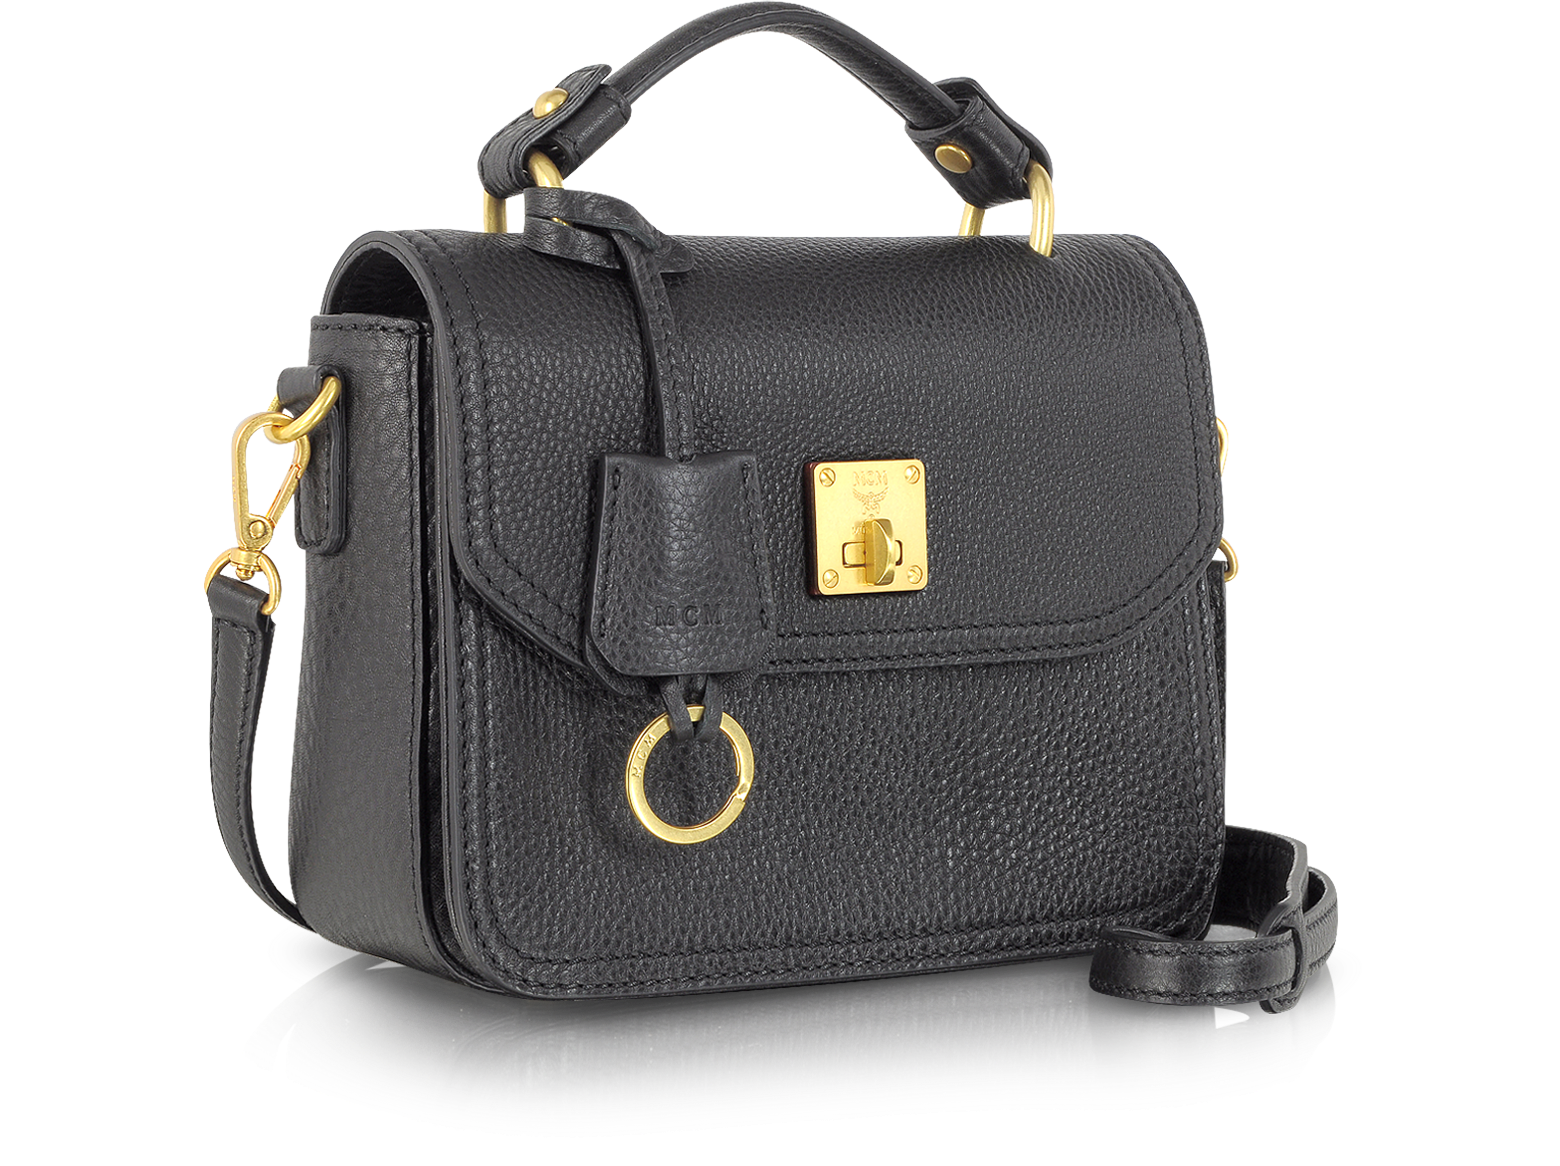 MCM First Lady Satchel Small at FORZIERI